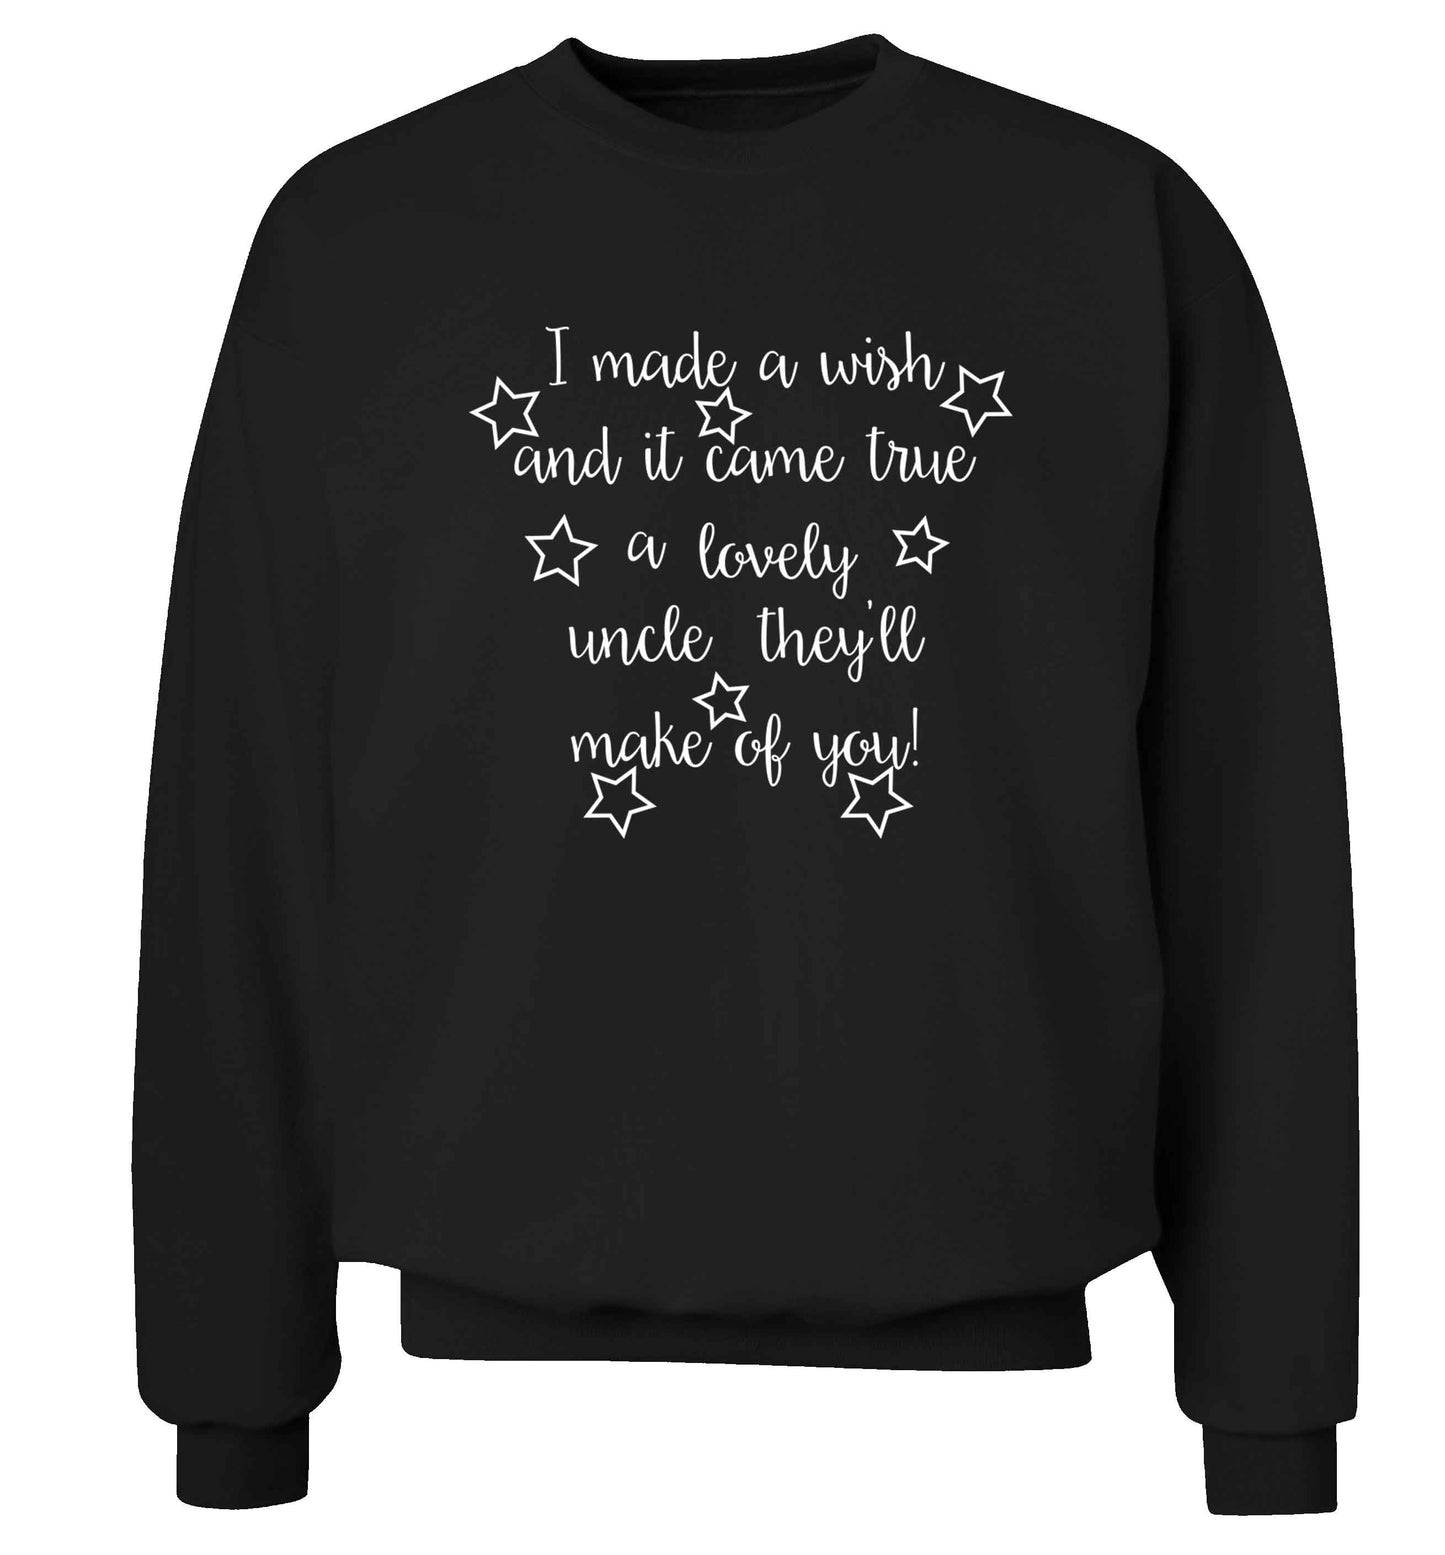 I made a wish and it came true a lovely uncle they'll make of you! Adult's unisex black Sweater 2XL